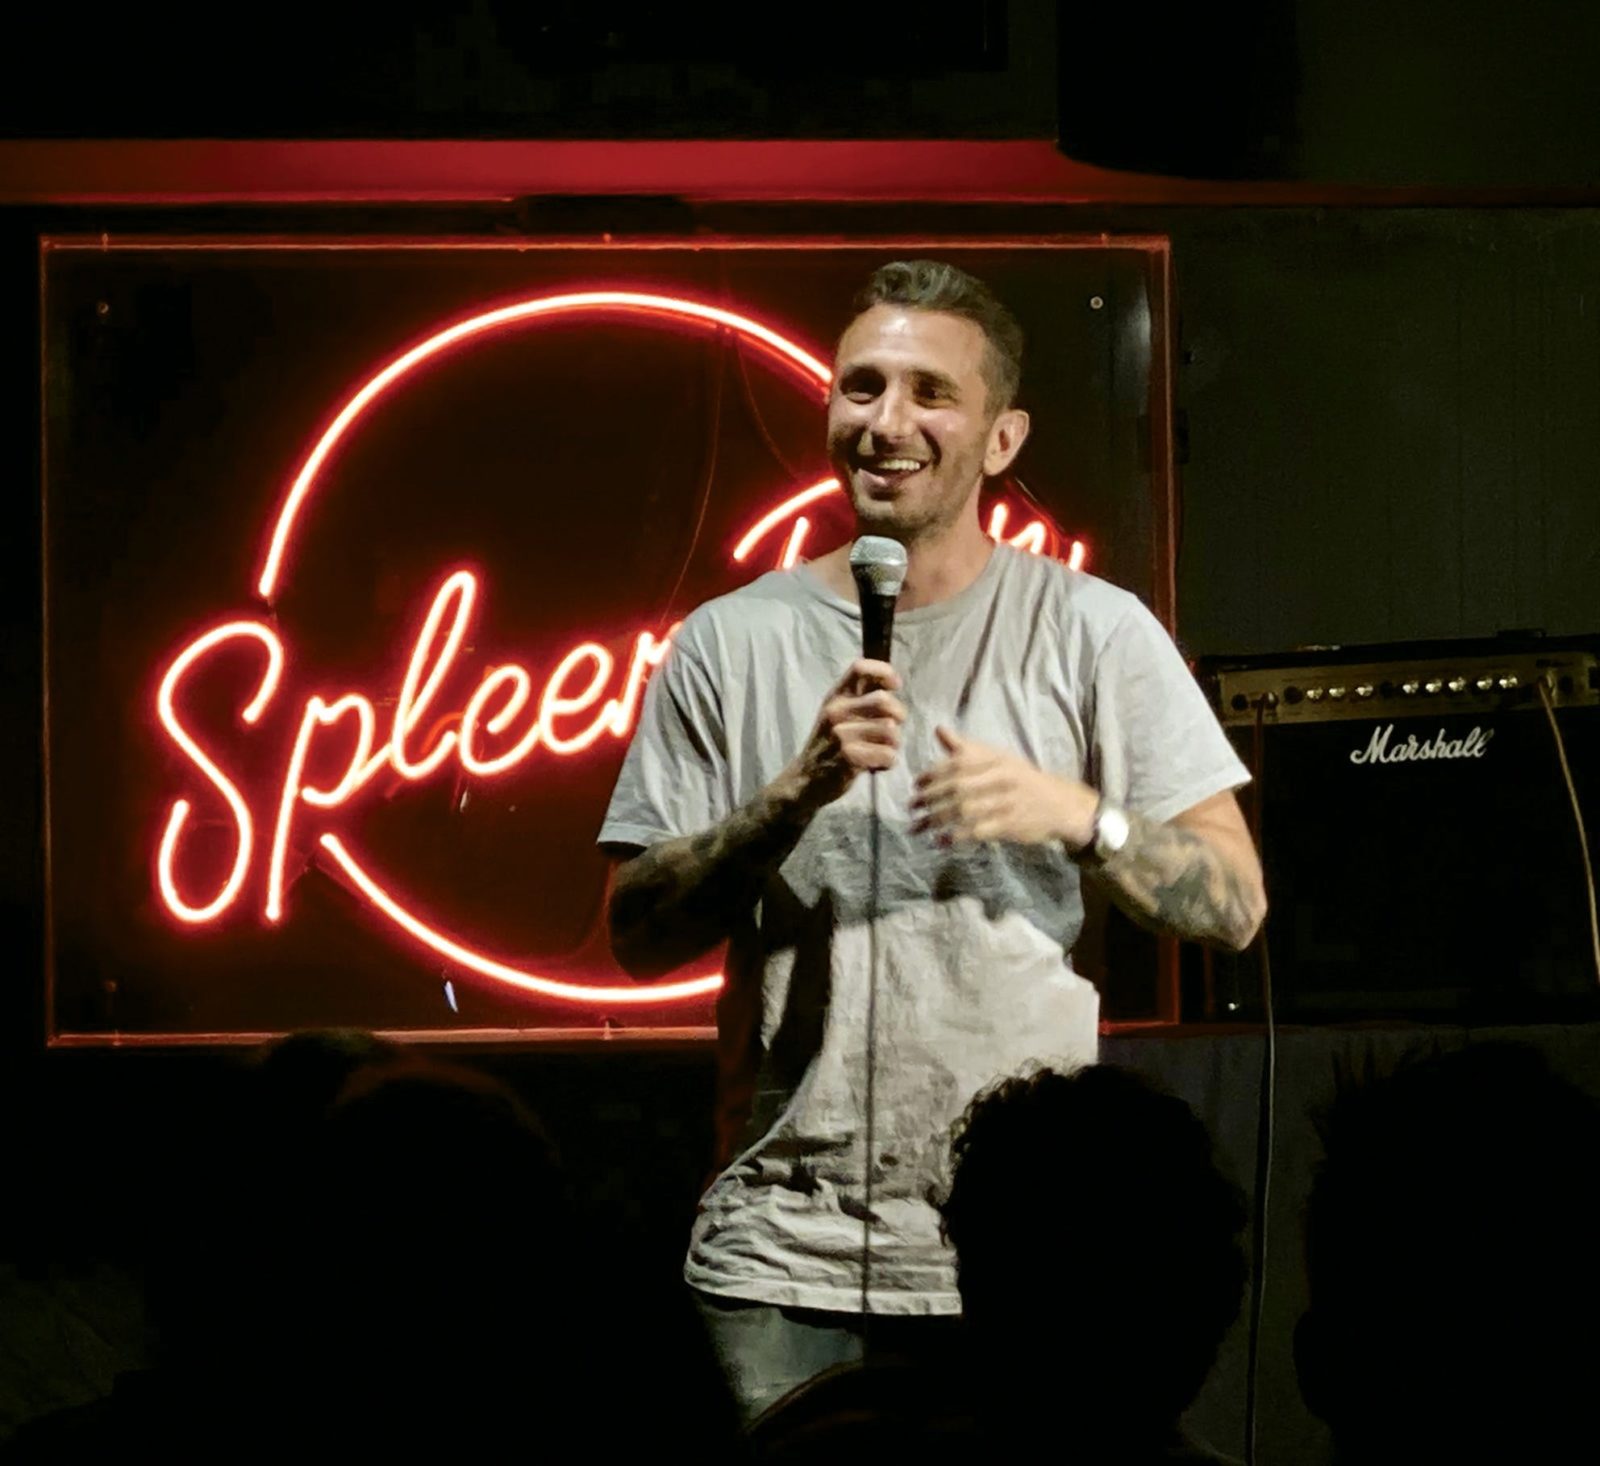 Tommy Little does a surprise set at Comedy at Spleen